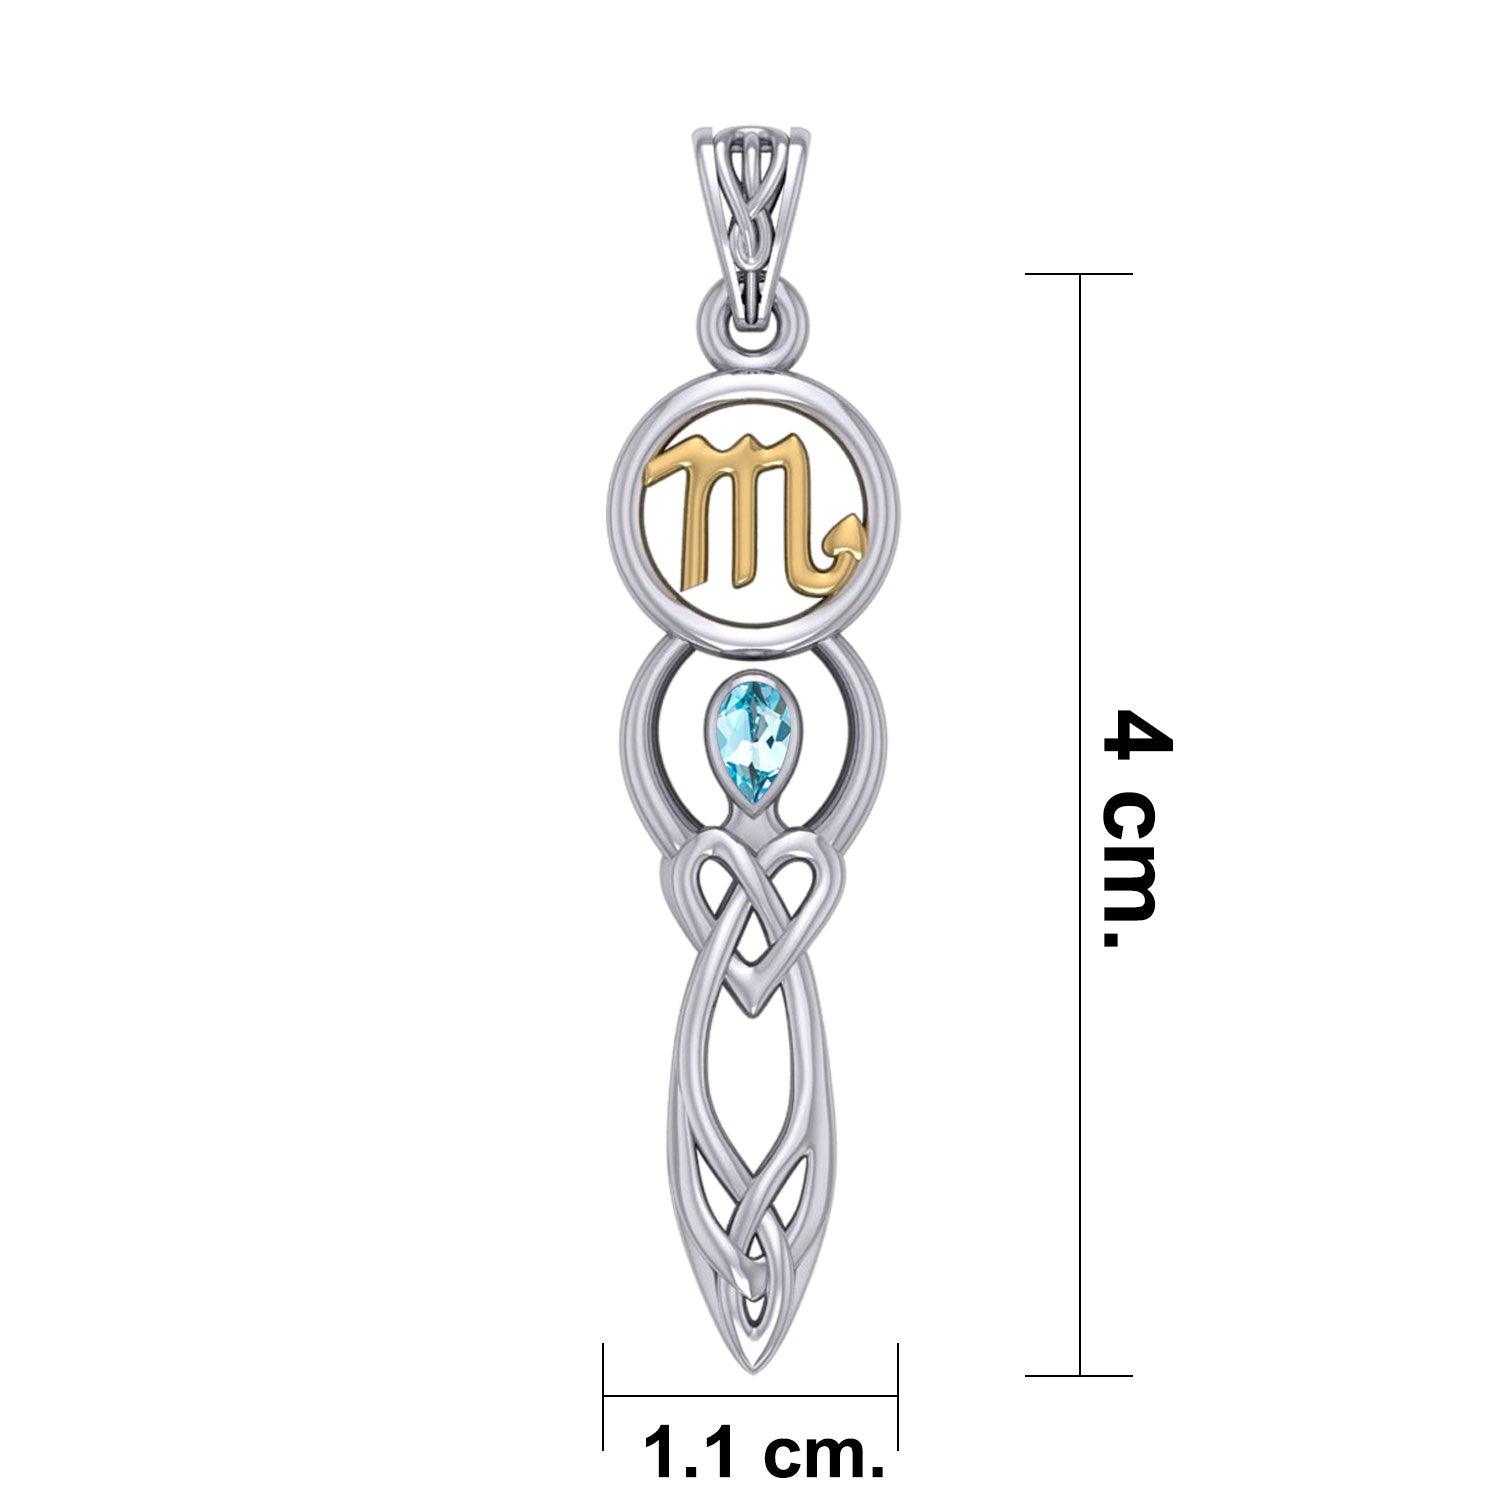 Celtic Goddess Scorpio Astrology Zodiac Sign Silver and Gold Accents Pendant with Blue Topaz MPD5942 - peterstone.dropshipping